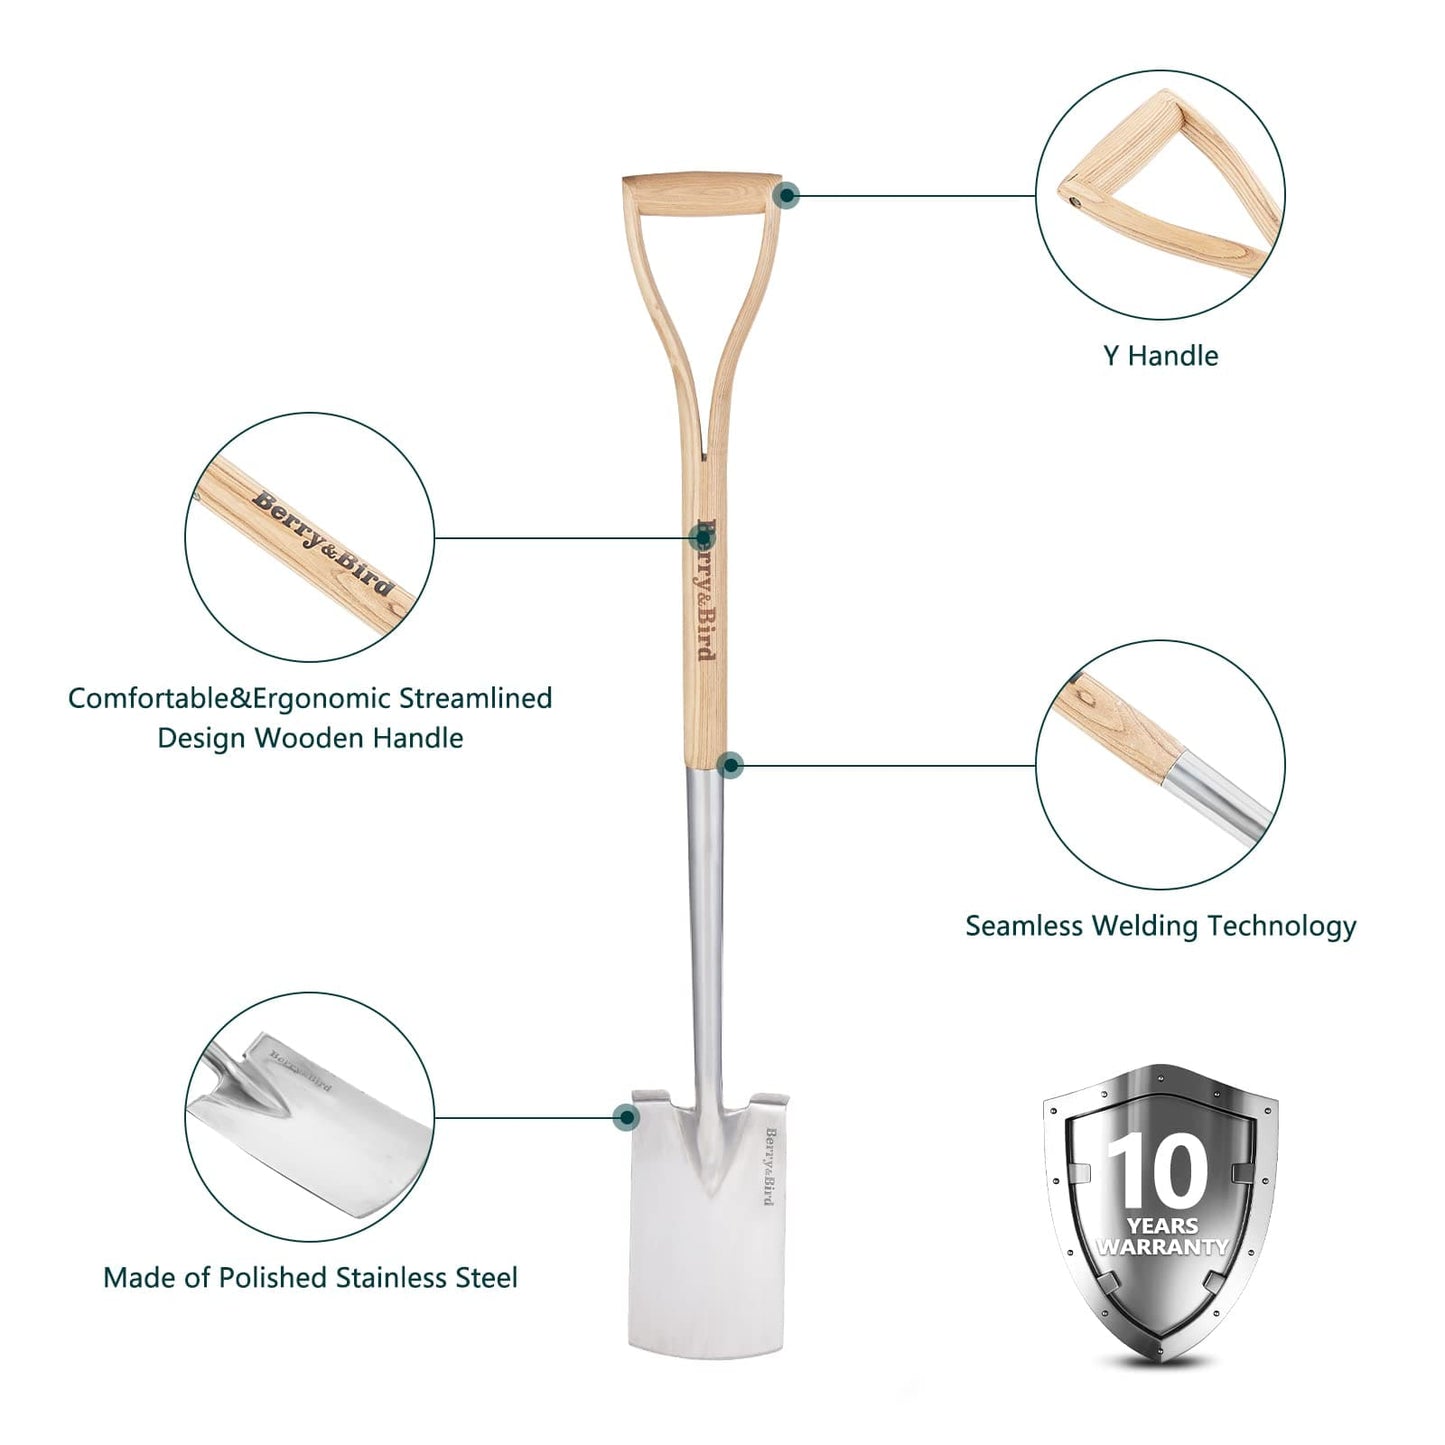 Digging Spade Gardening Square Border Spade 41.3 inch with D-Grip Handle